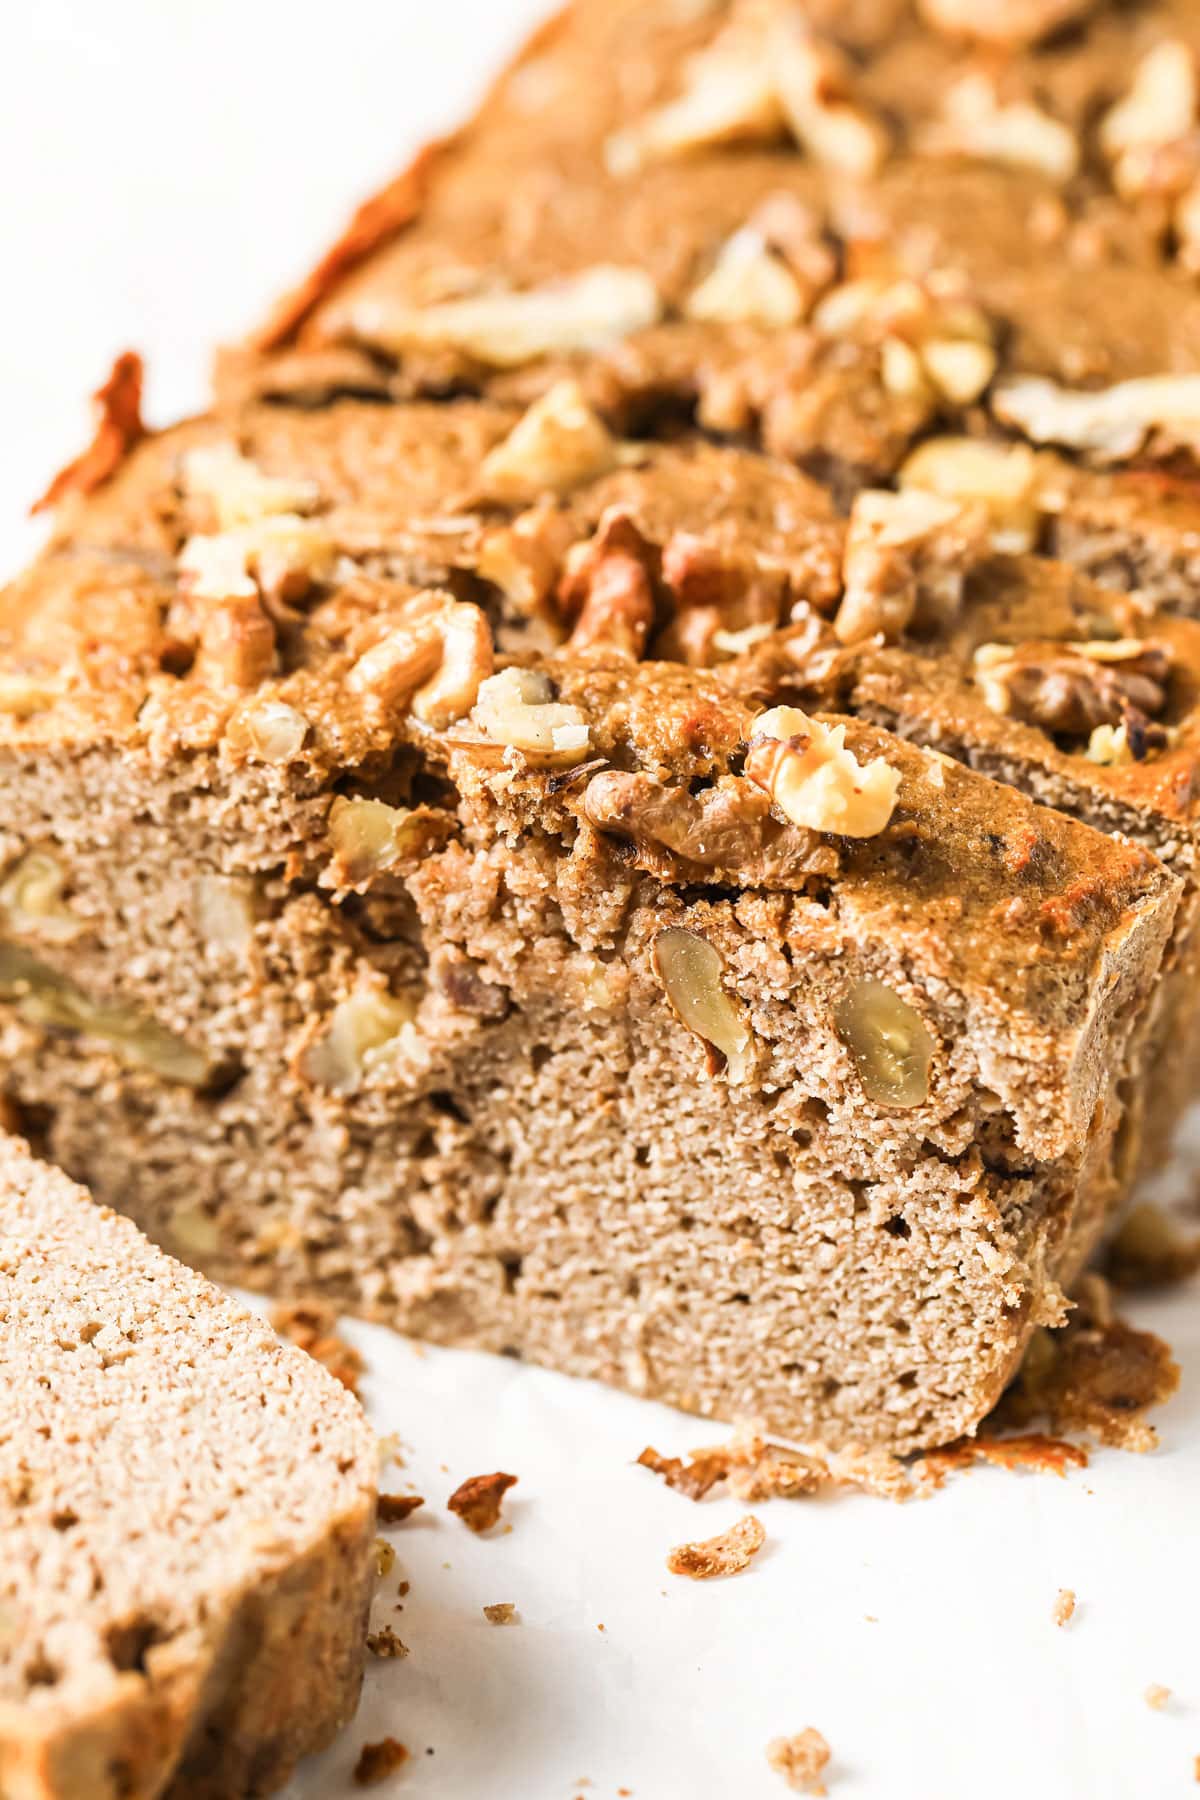 A loaf of banana bread sliced with walnuts.